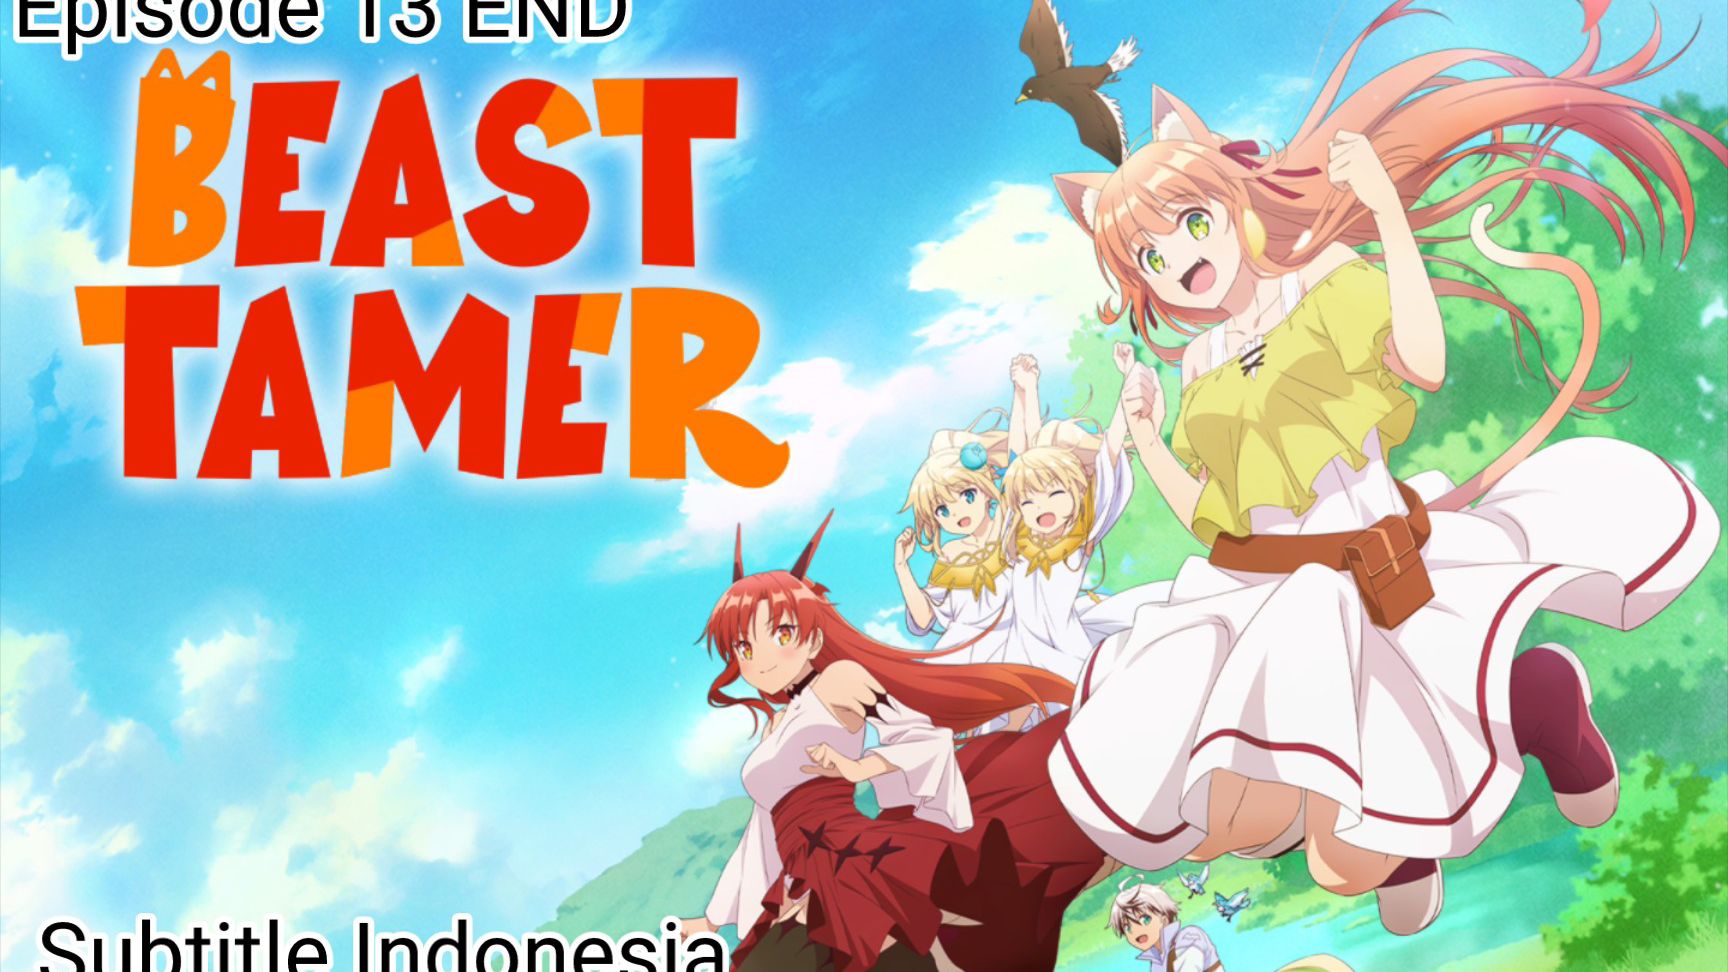 Beast Tamer ~ Episode 13 END Sub.Indo - Video Dailymotion